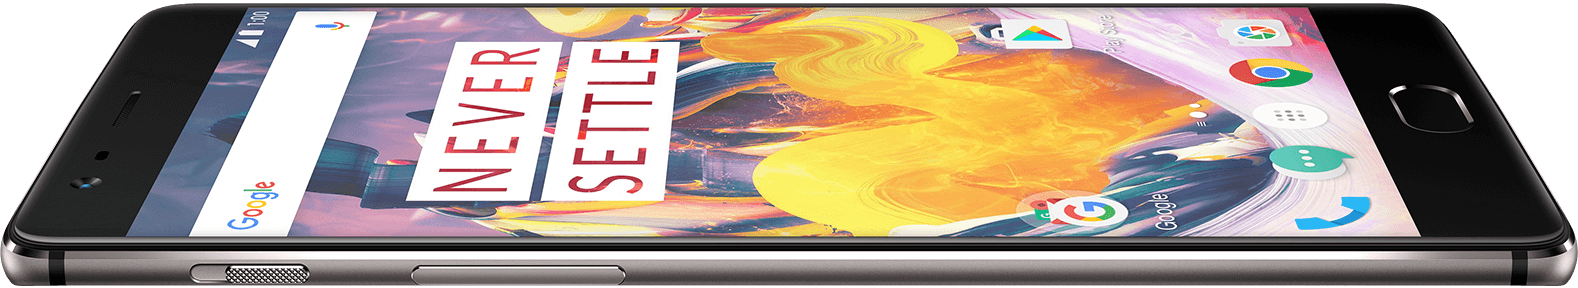 OnePlus 3T coming to the UK on November 28, 2016